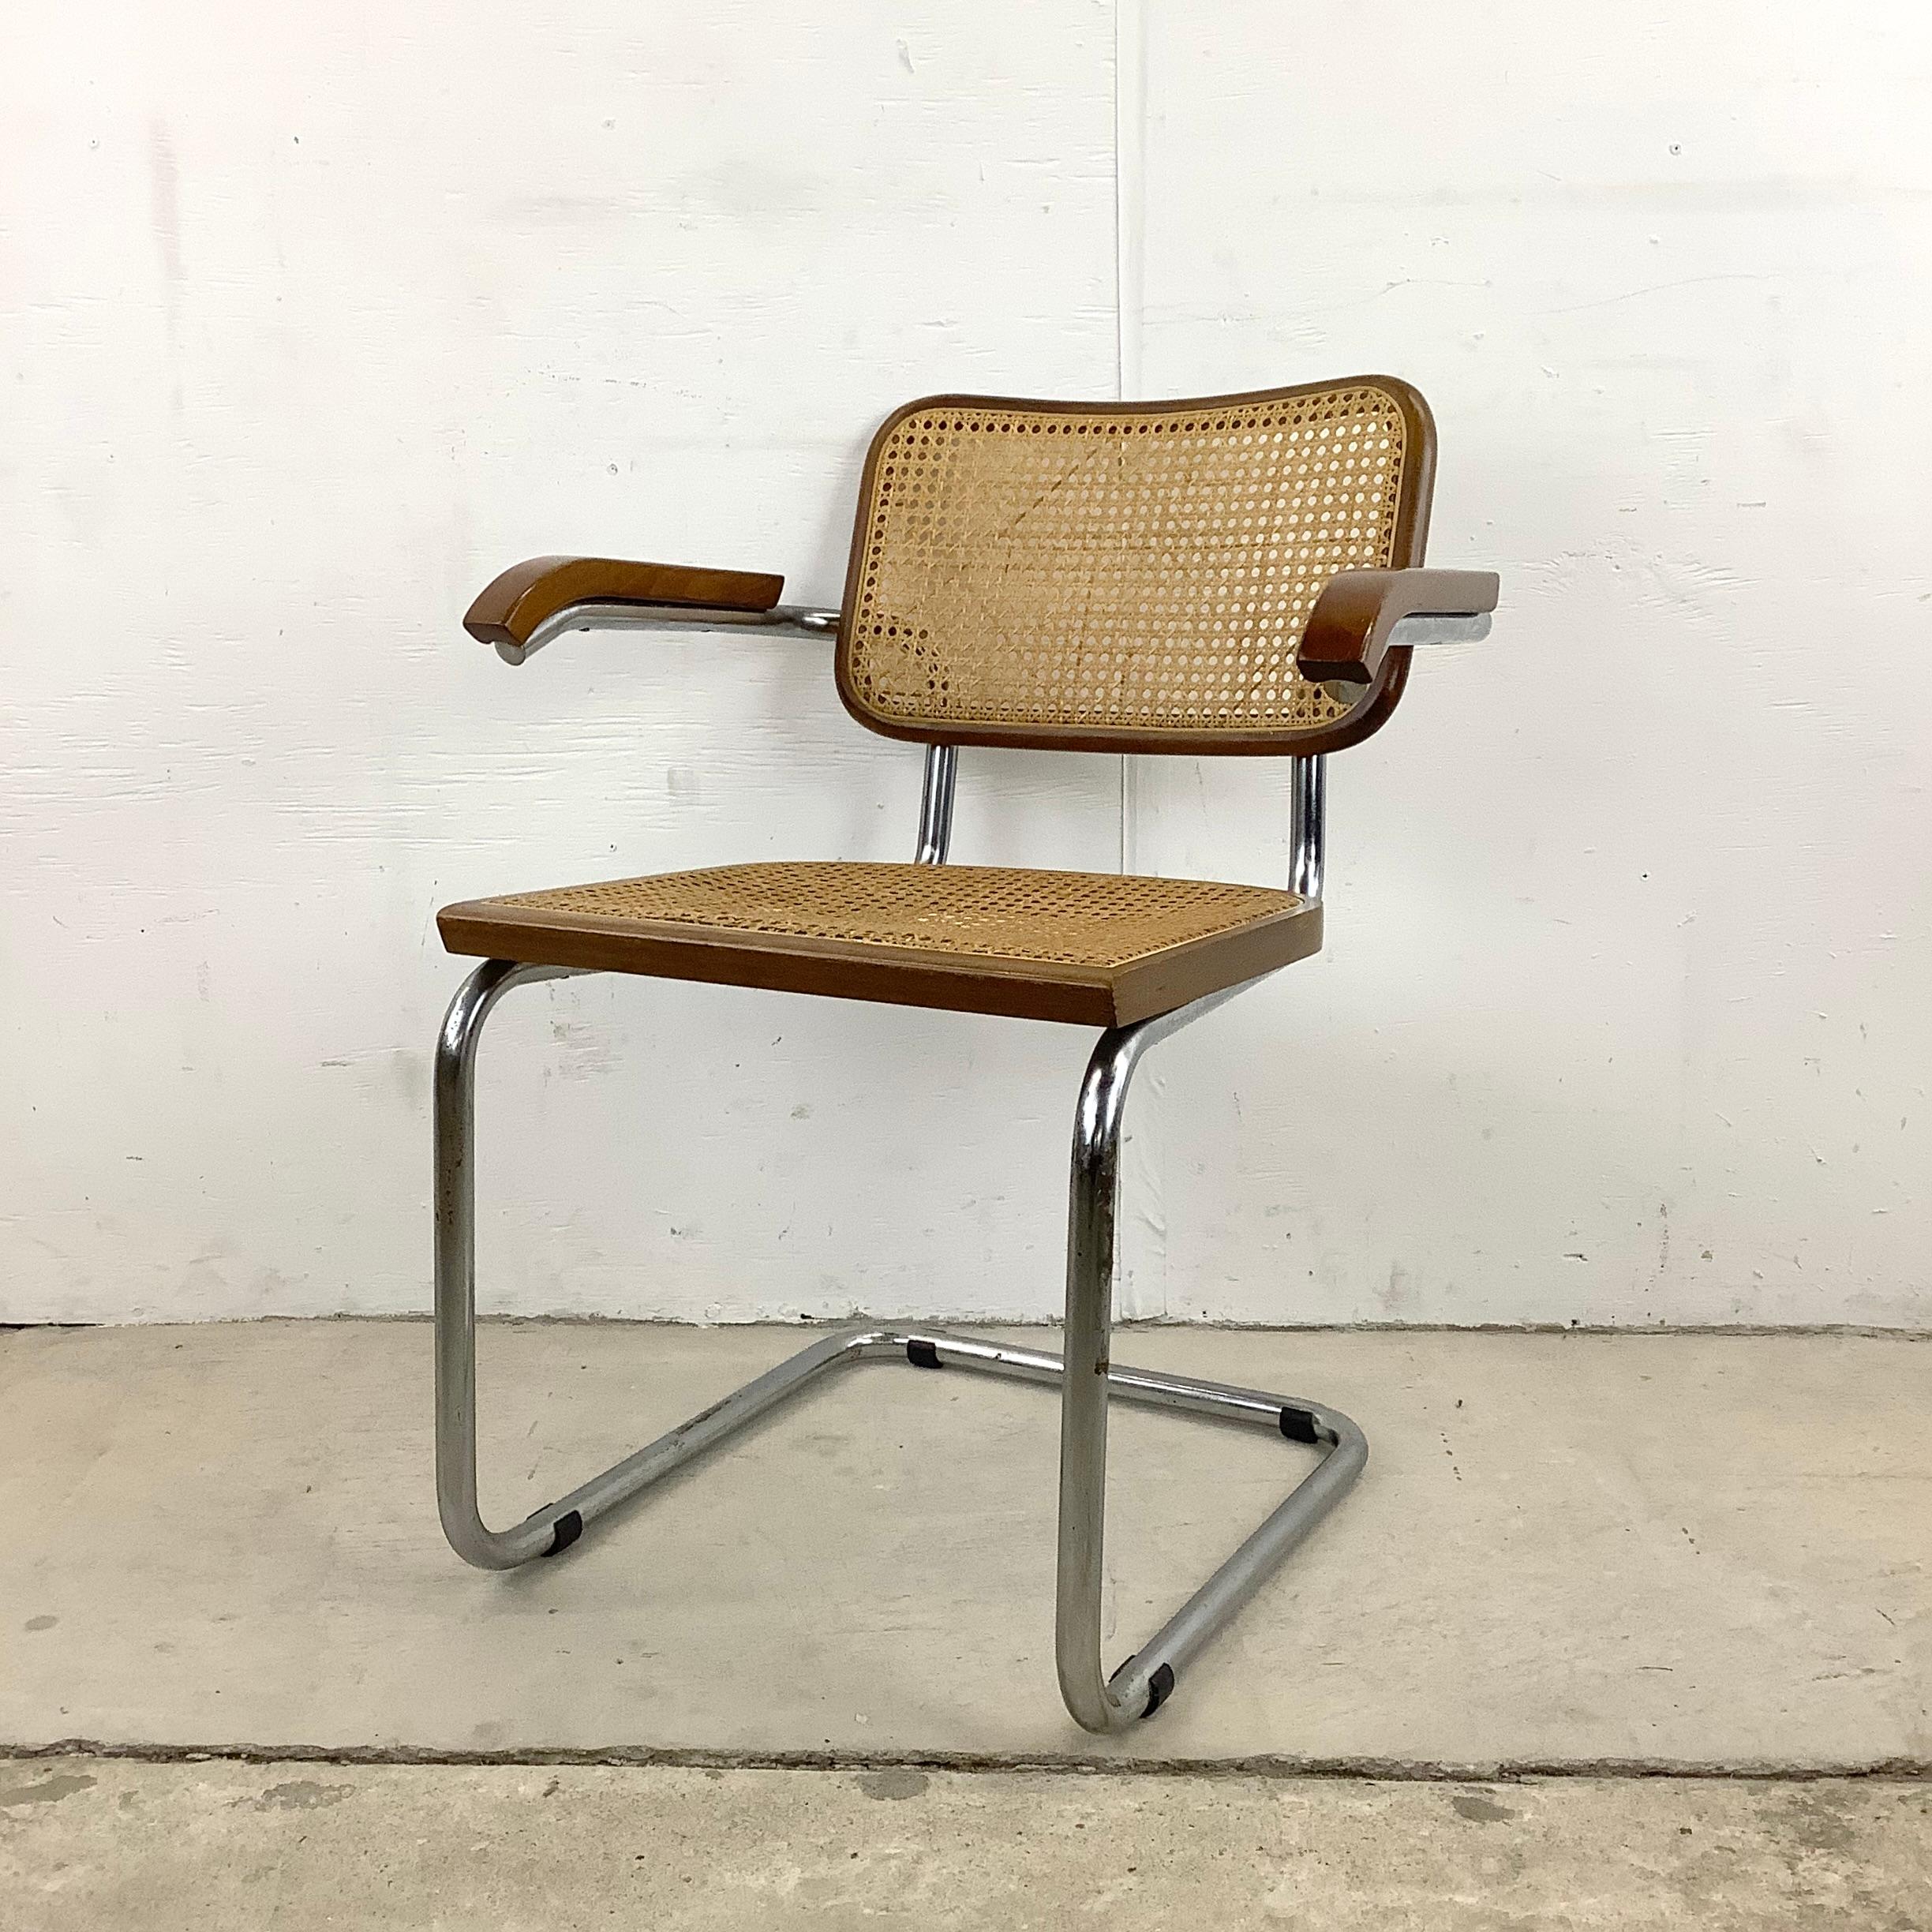 This stylish vintage modern dining chair features tubular chrome frame, cane seat back, and vintage cane seat. The stylish mid-century modern design of this armchair makes an impressive and comfy addition to any dining set or office/waiting room